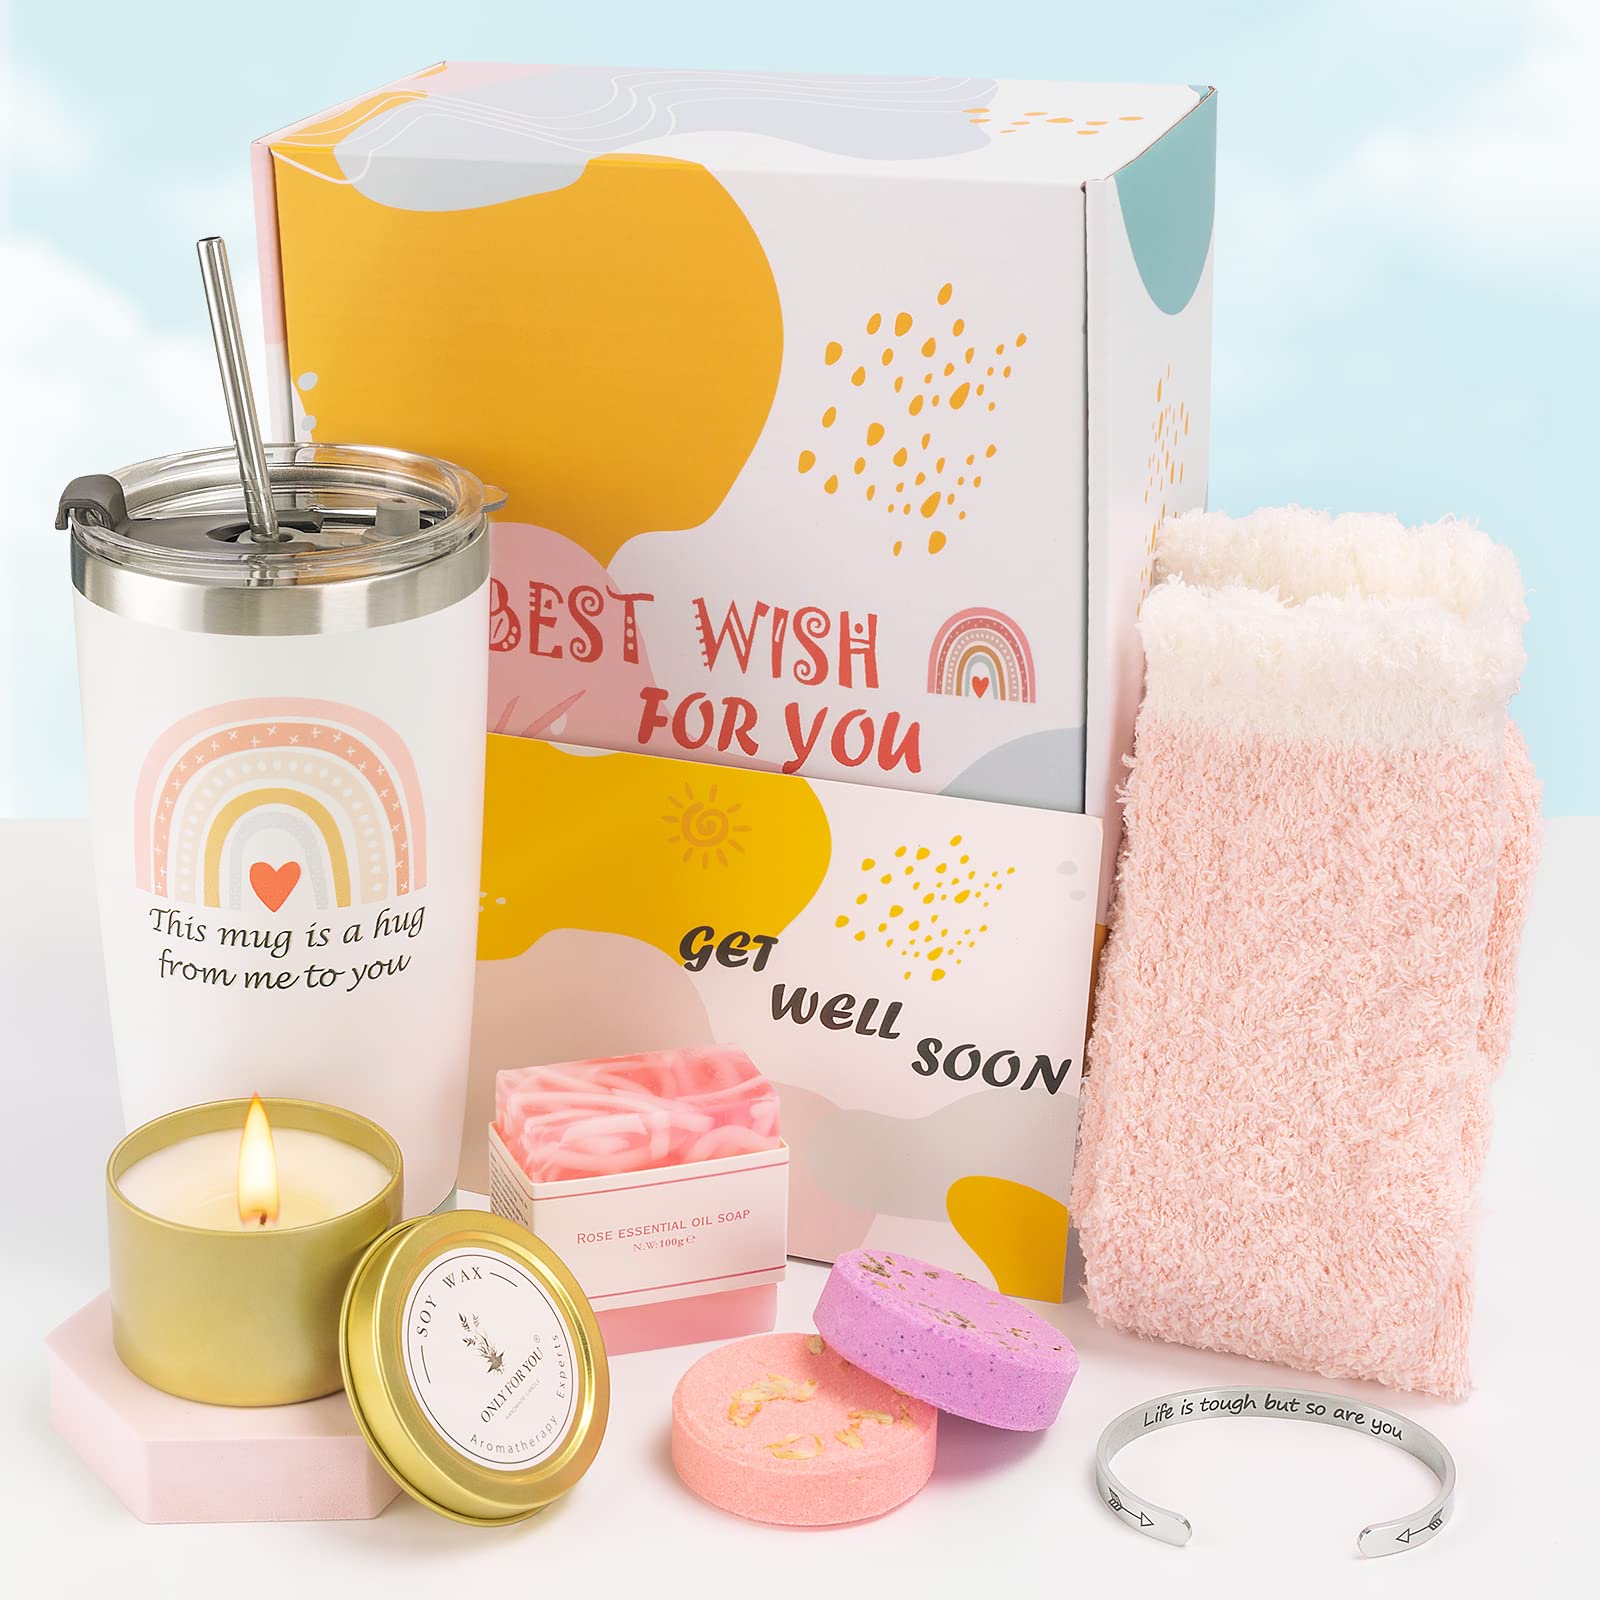 Get Well Soon Gifts for Women - Care Package Thinking of You Gifts -  Rainforest Medspa